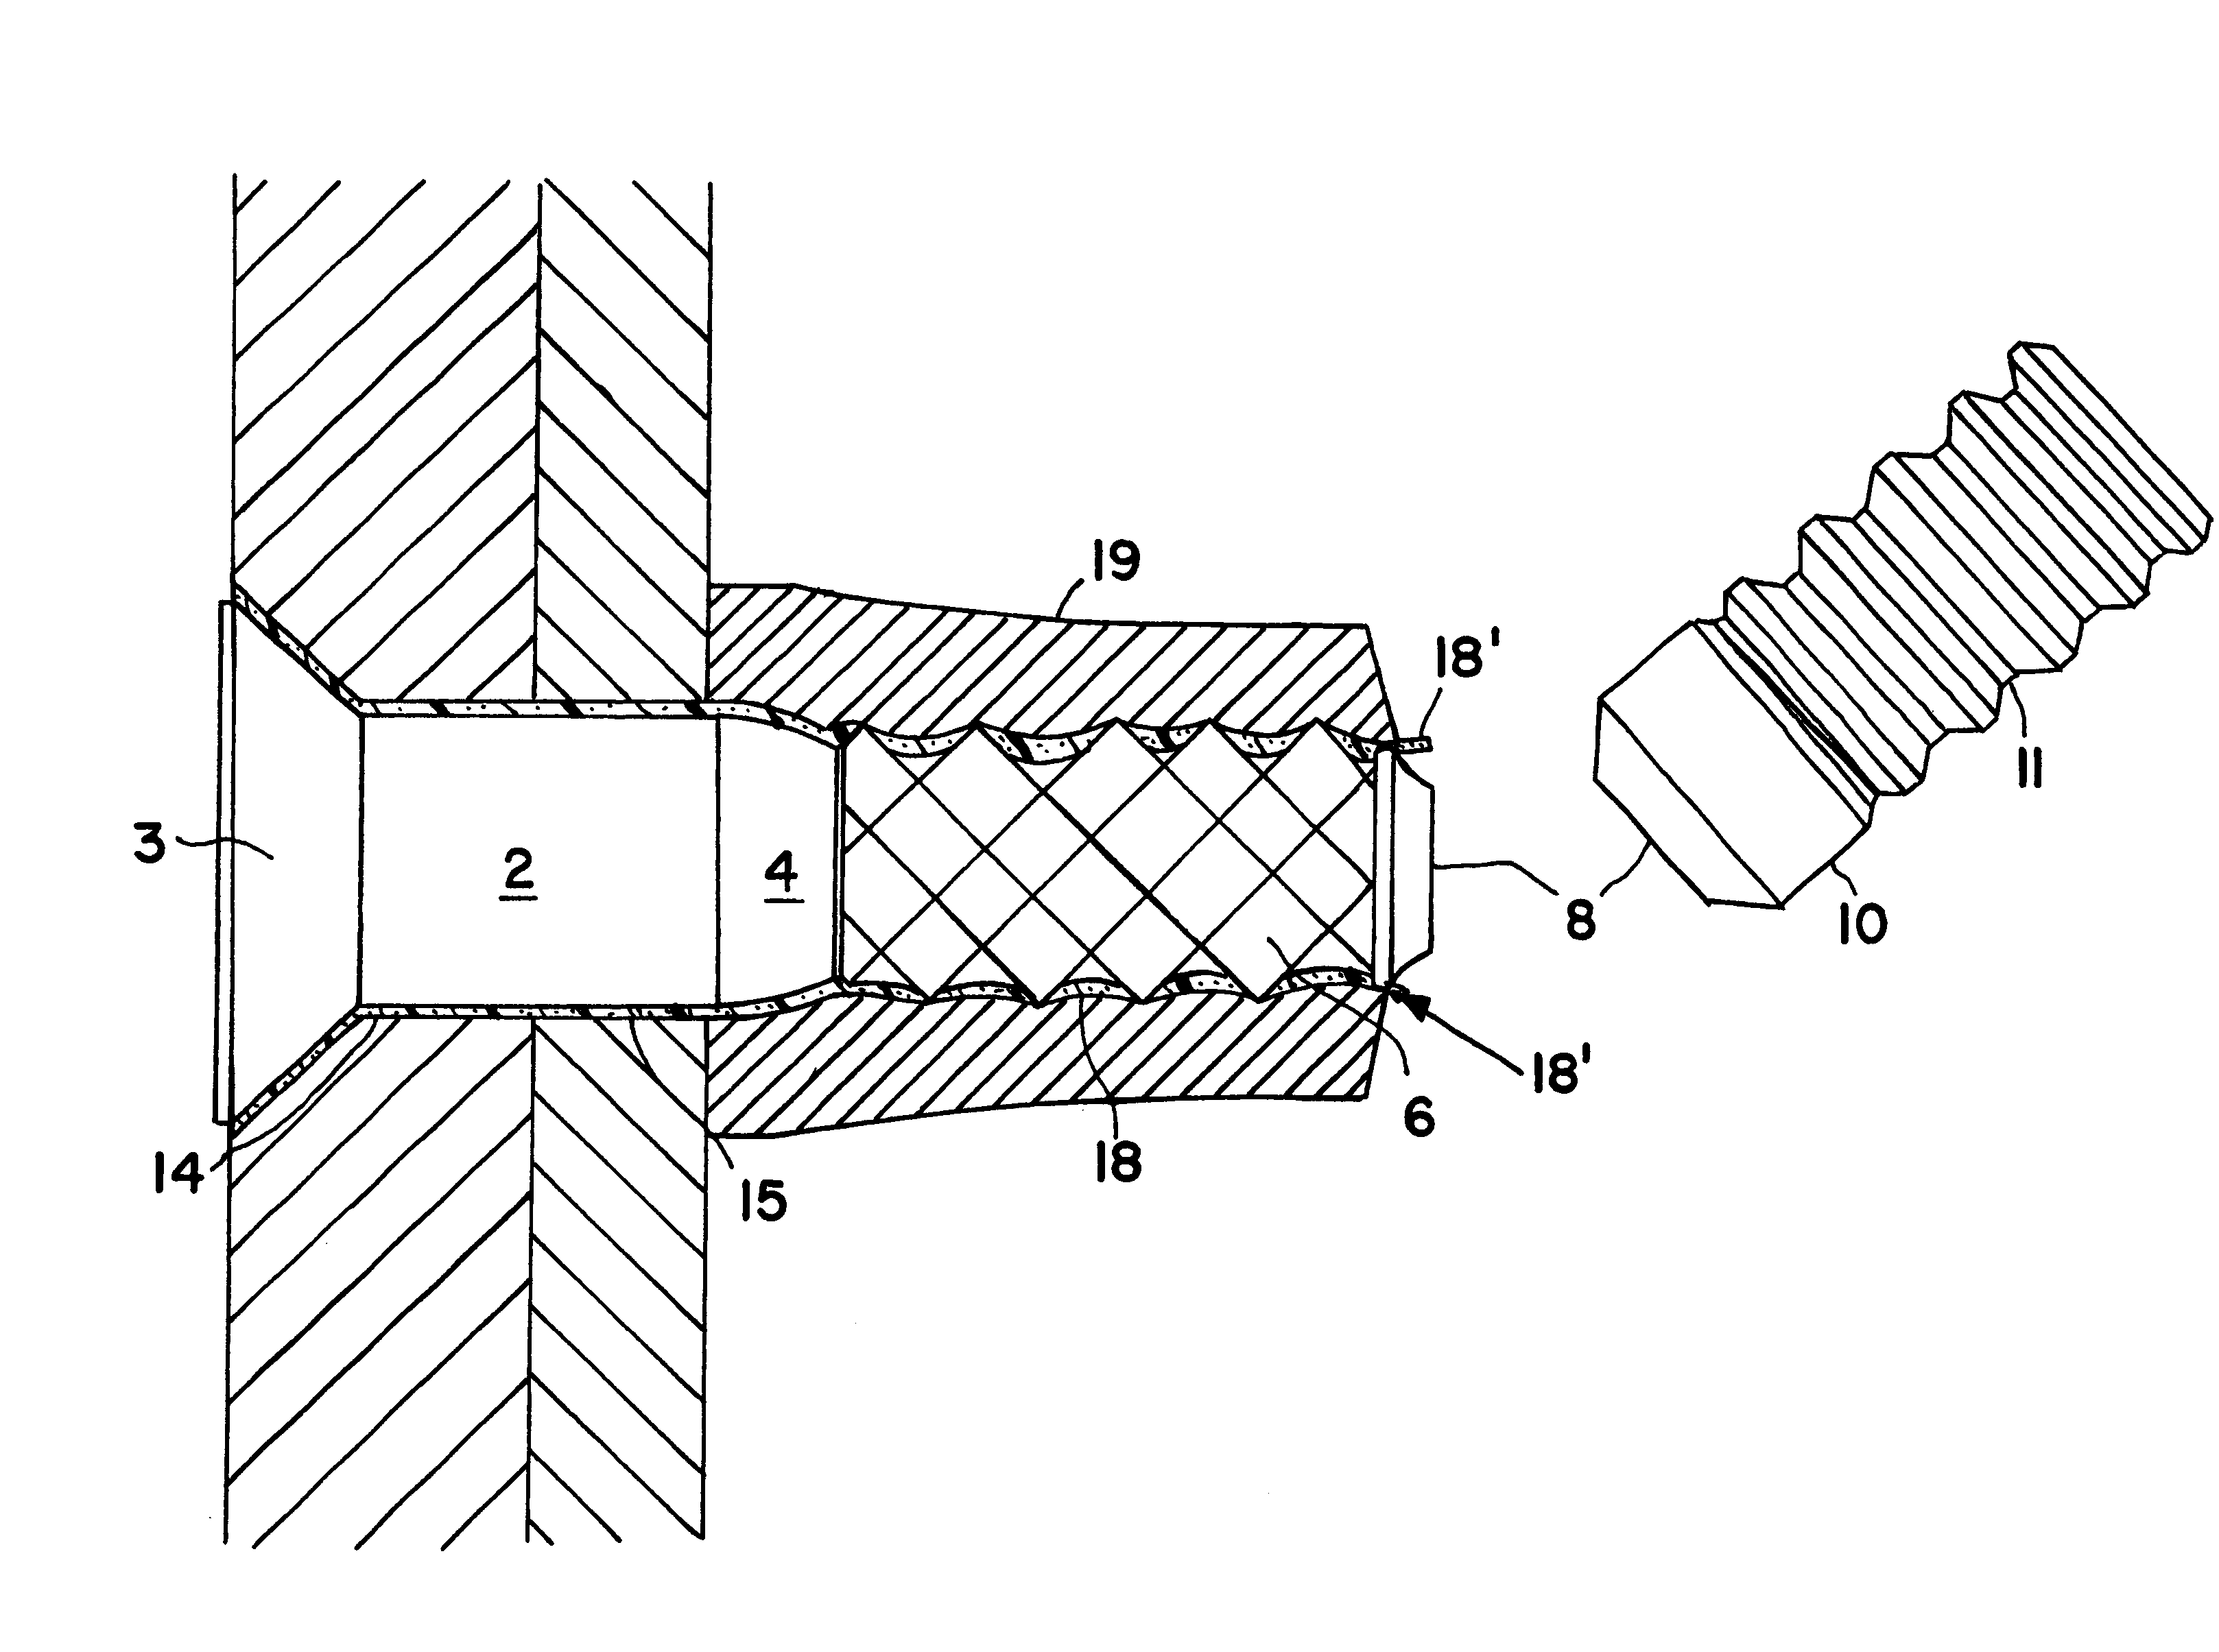 Lockbolt for forming a mechanically secured and sealant sealed connection between components